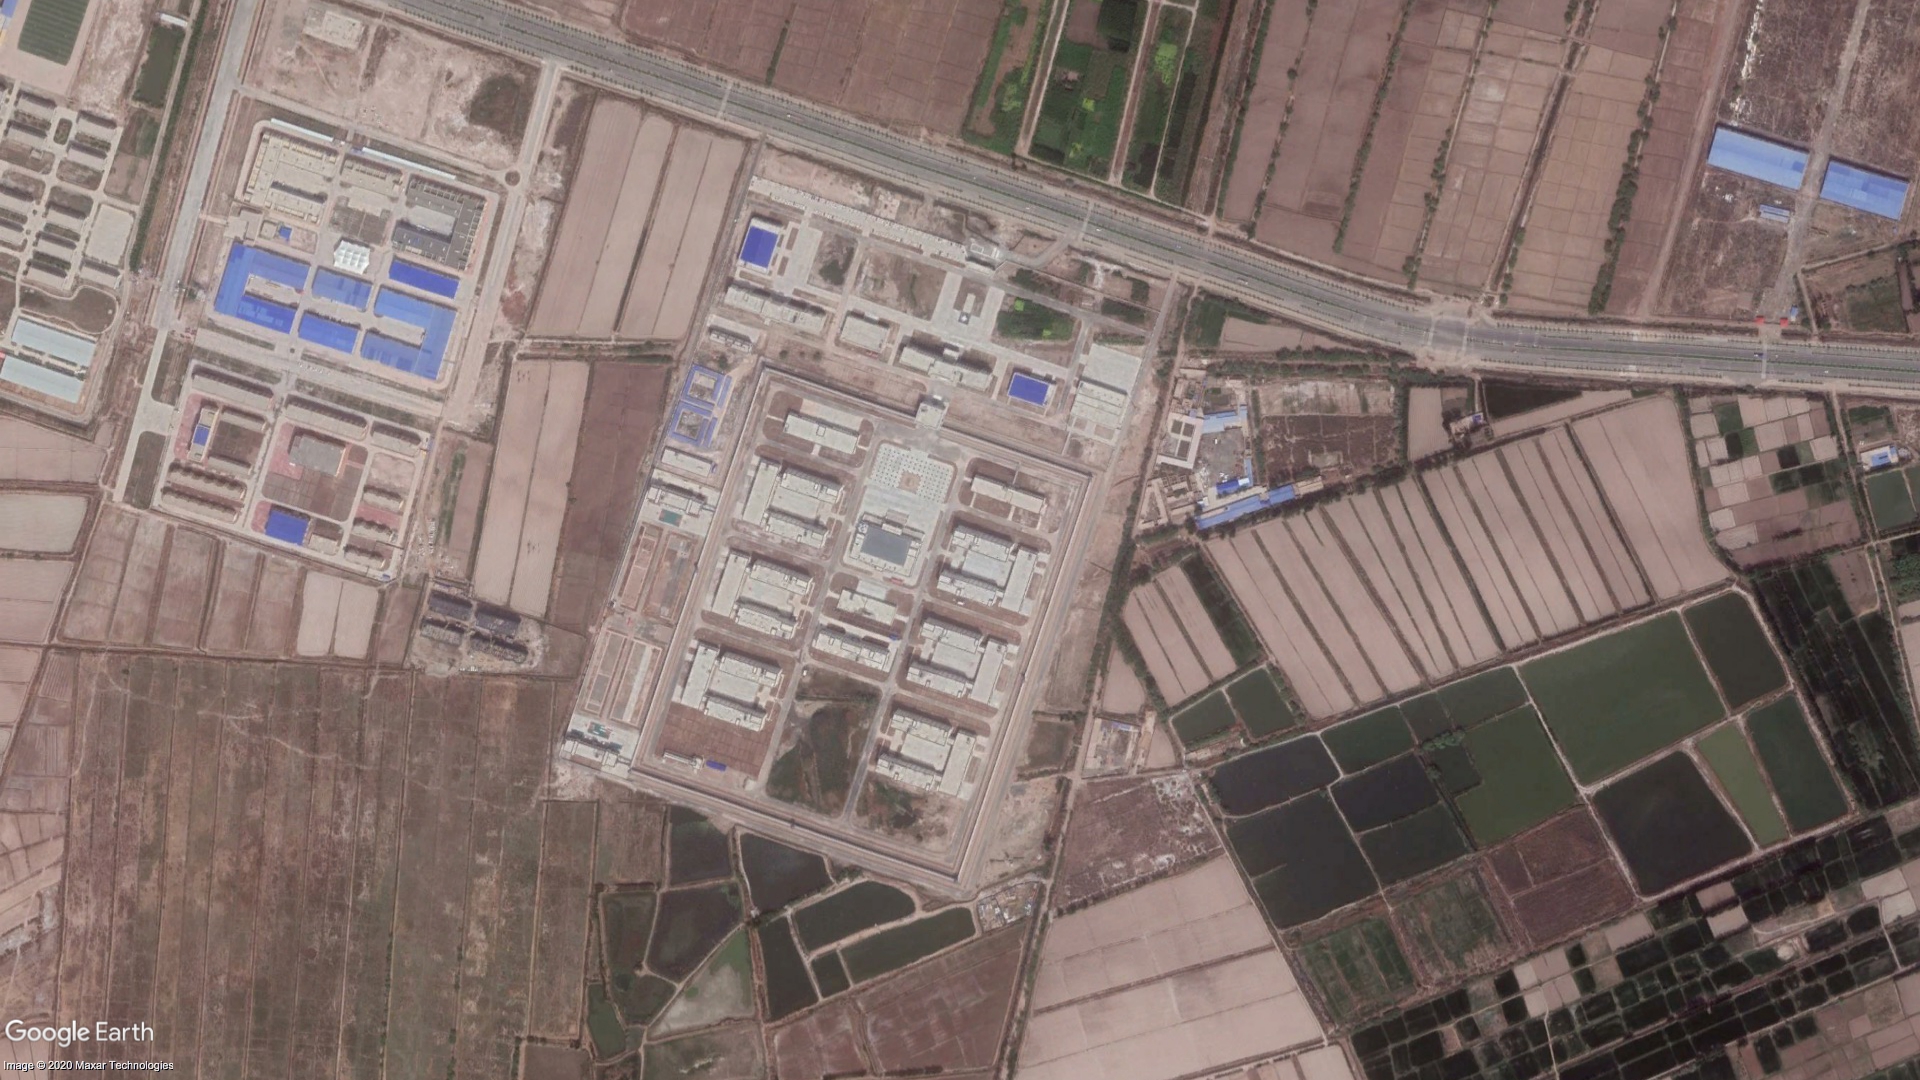 Satellite images show a network of suspected detention camps built by the Chinese government since 2017